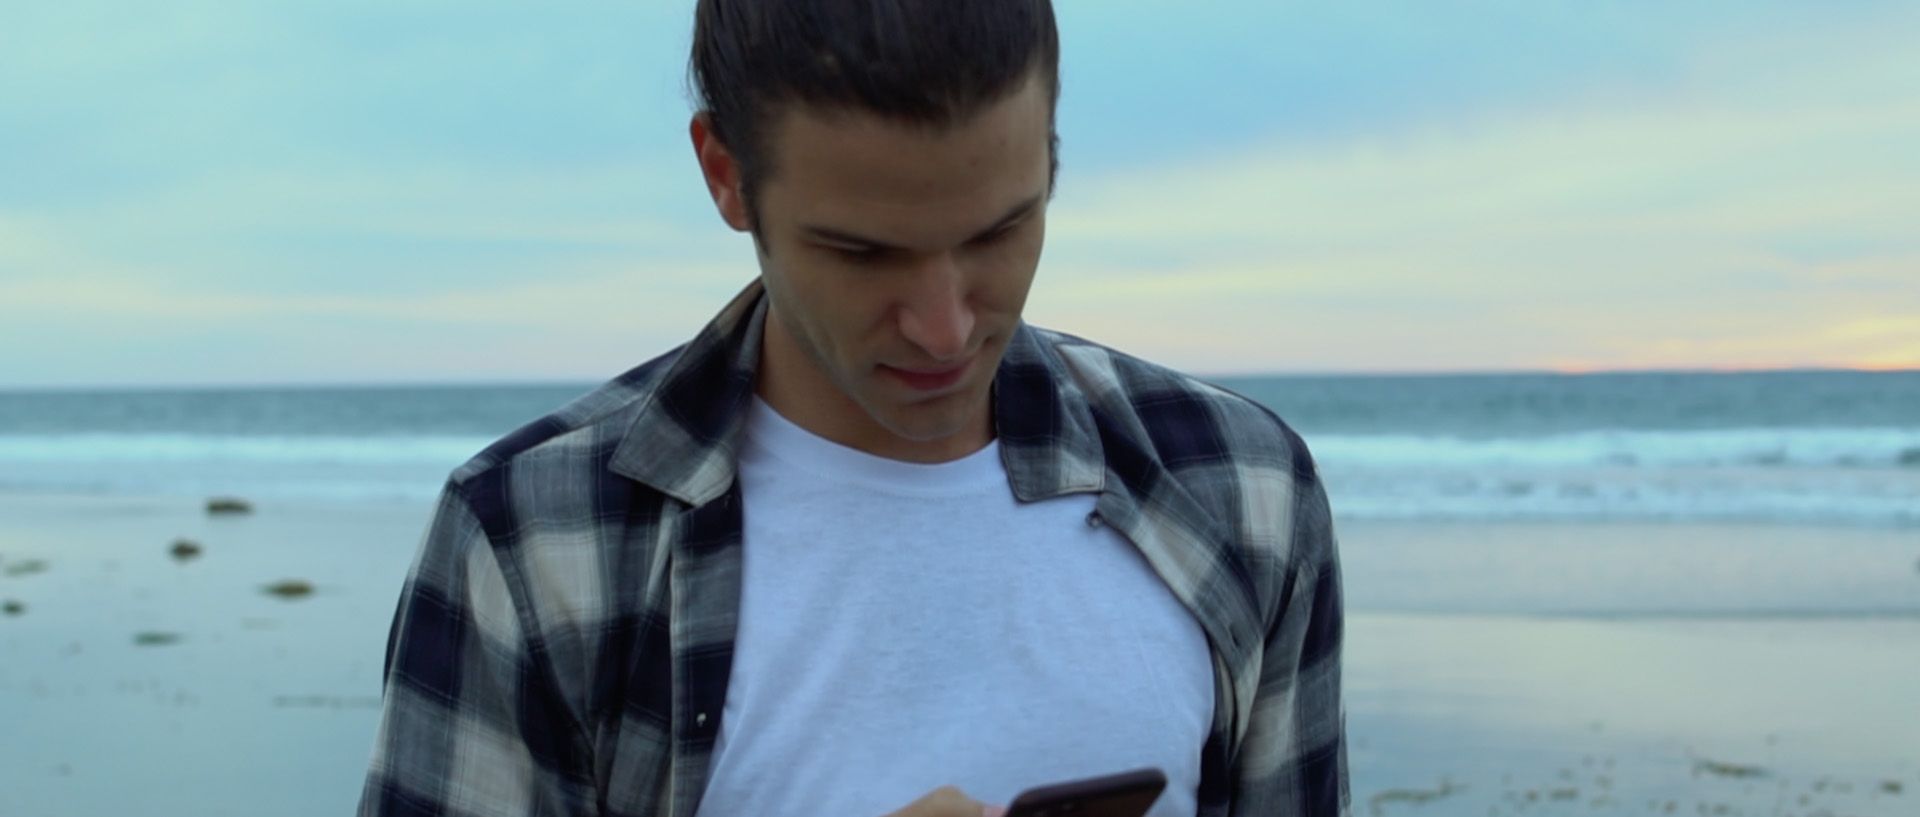 A still of JJ walking on the beach looking at his phone.